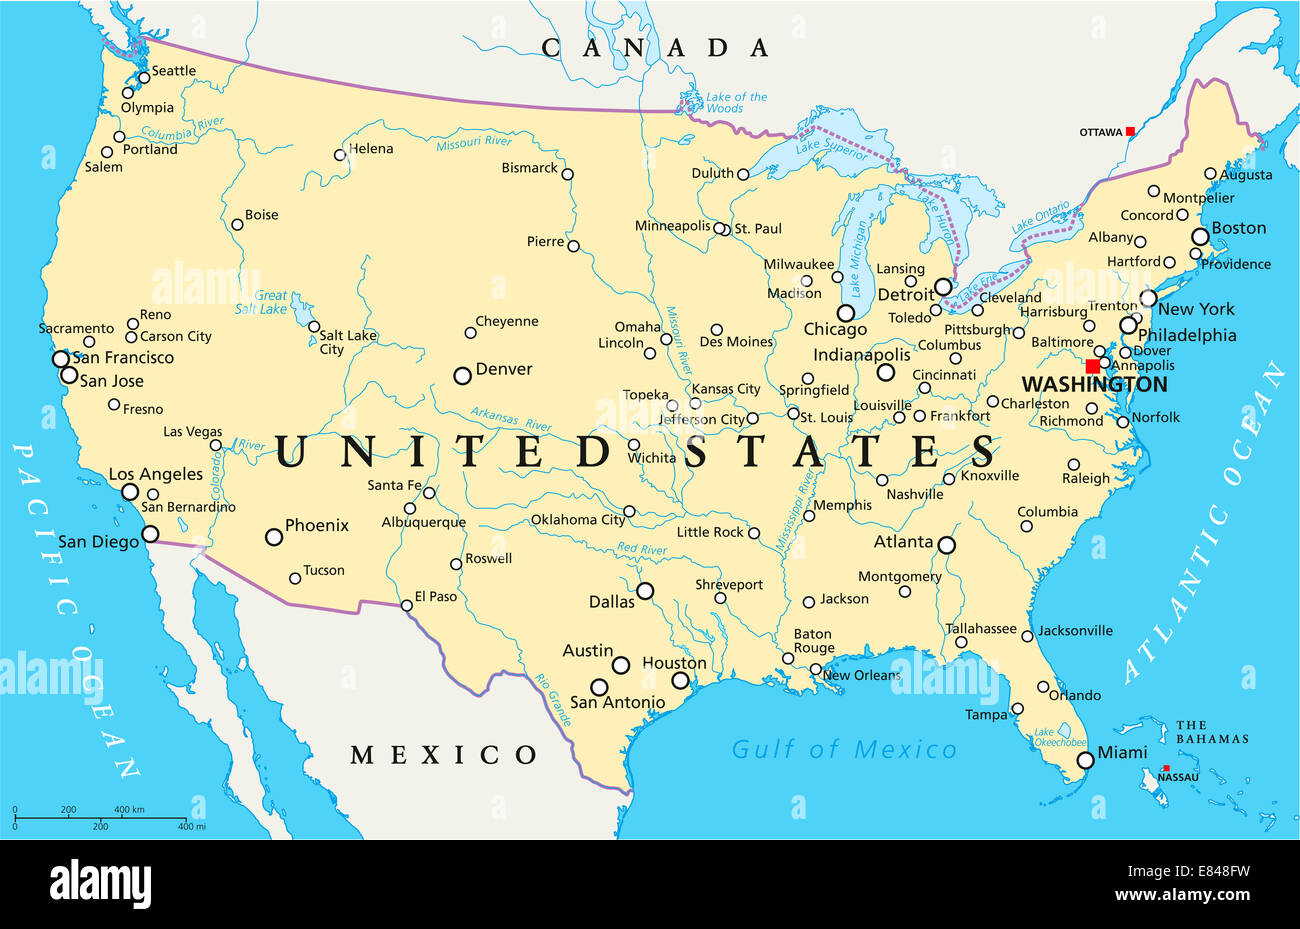 United States of America Political Map Stock Photo